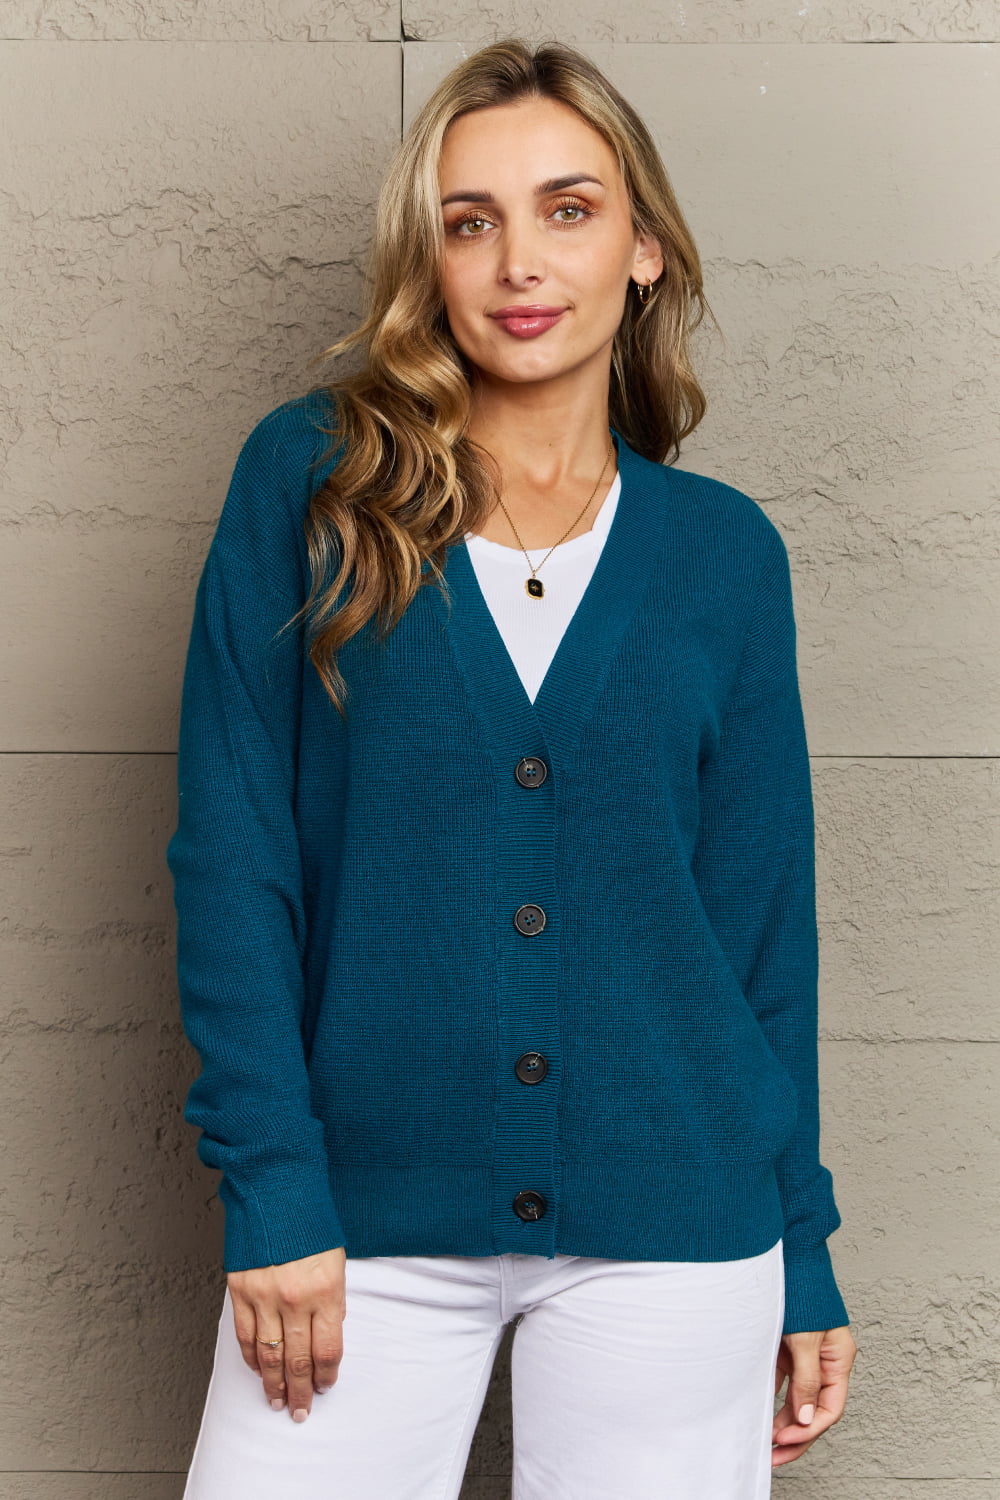 Kiss Me Tonight Full Size Button Down Cardigan in Teal - Blue / S - Women’s Clothing & Accessories - Shirts & Tops